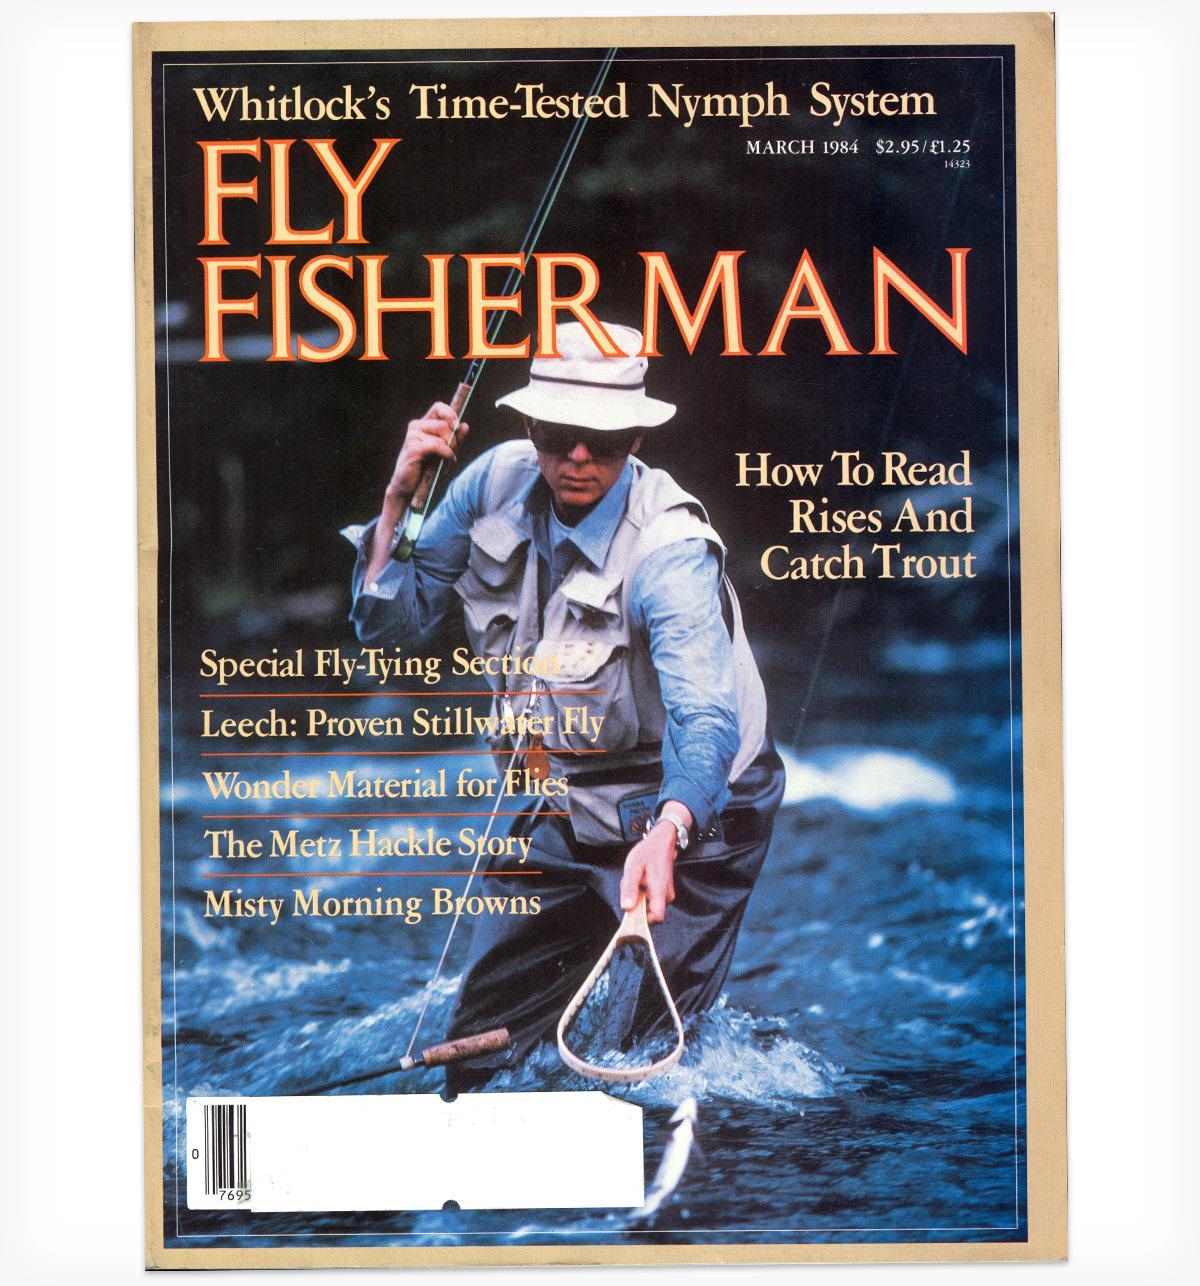 Understanding Leaders and Tippets  Hatch Magazine - Fly Fishing, etc.